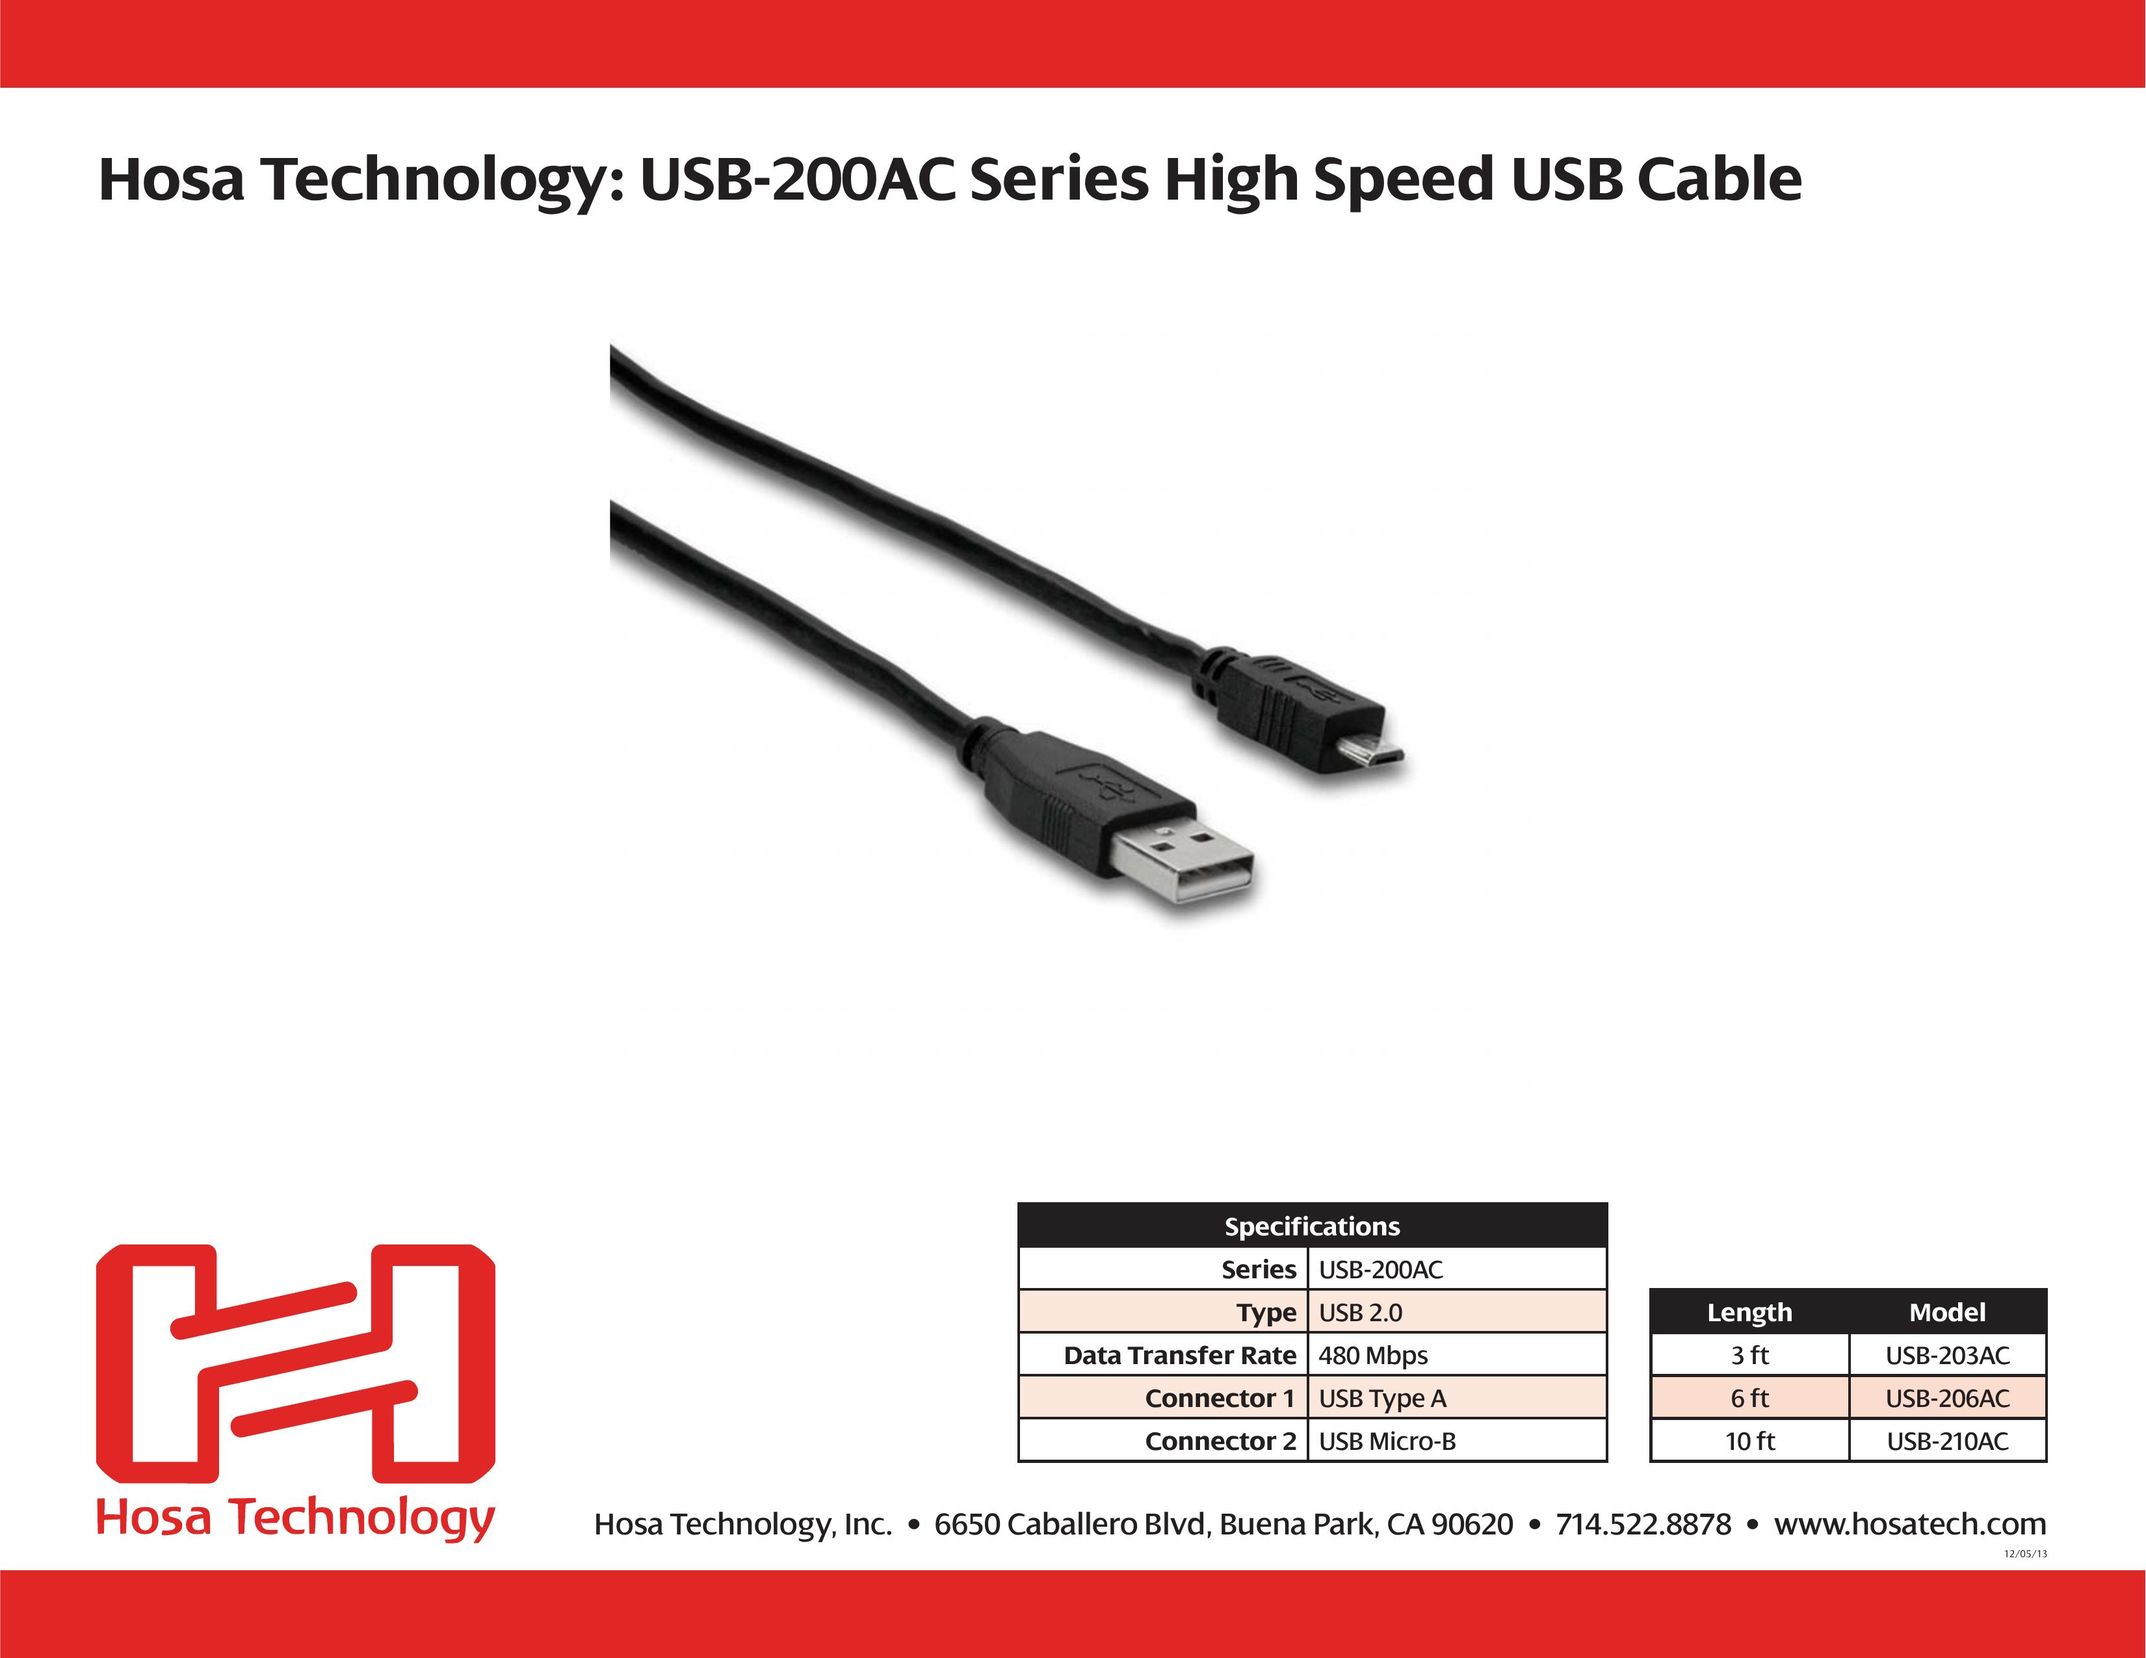 Hosa Technology USB-210AC Network Cables User Manual